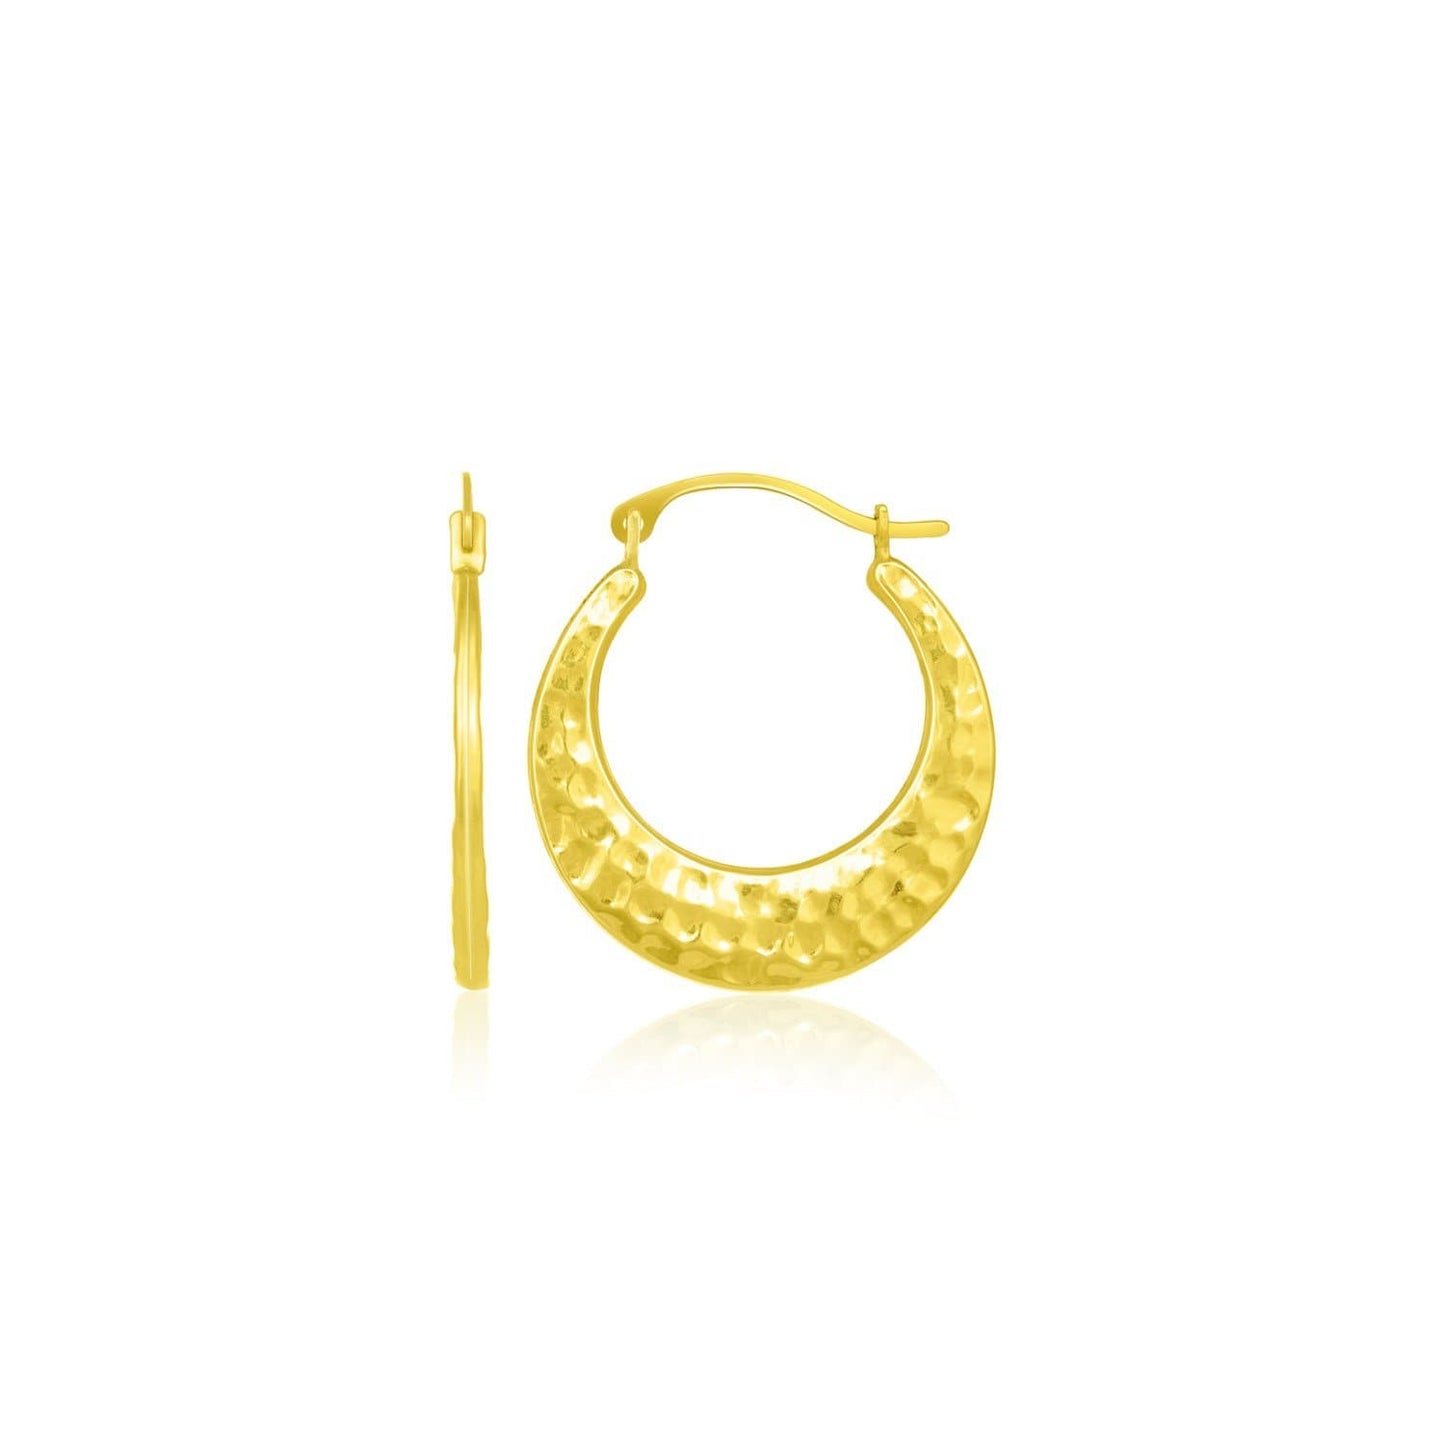 Graduated Textured Hoops in 10K Yellow Gold